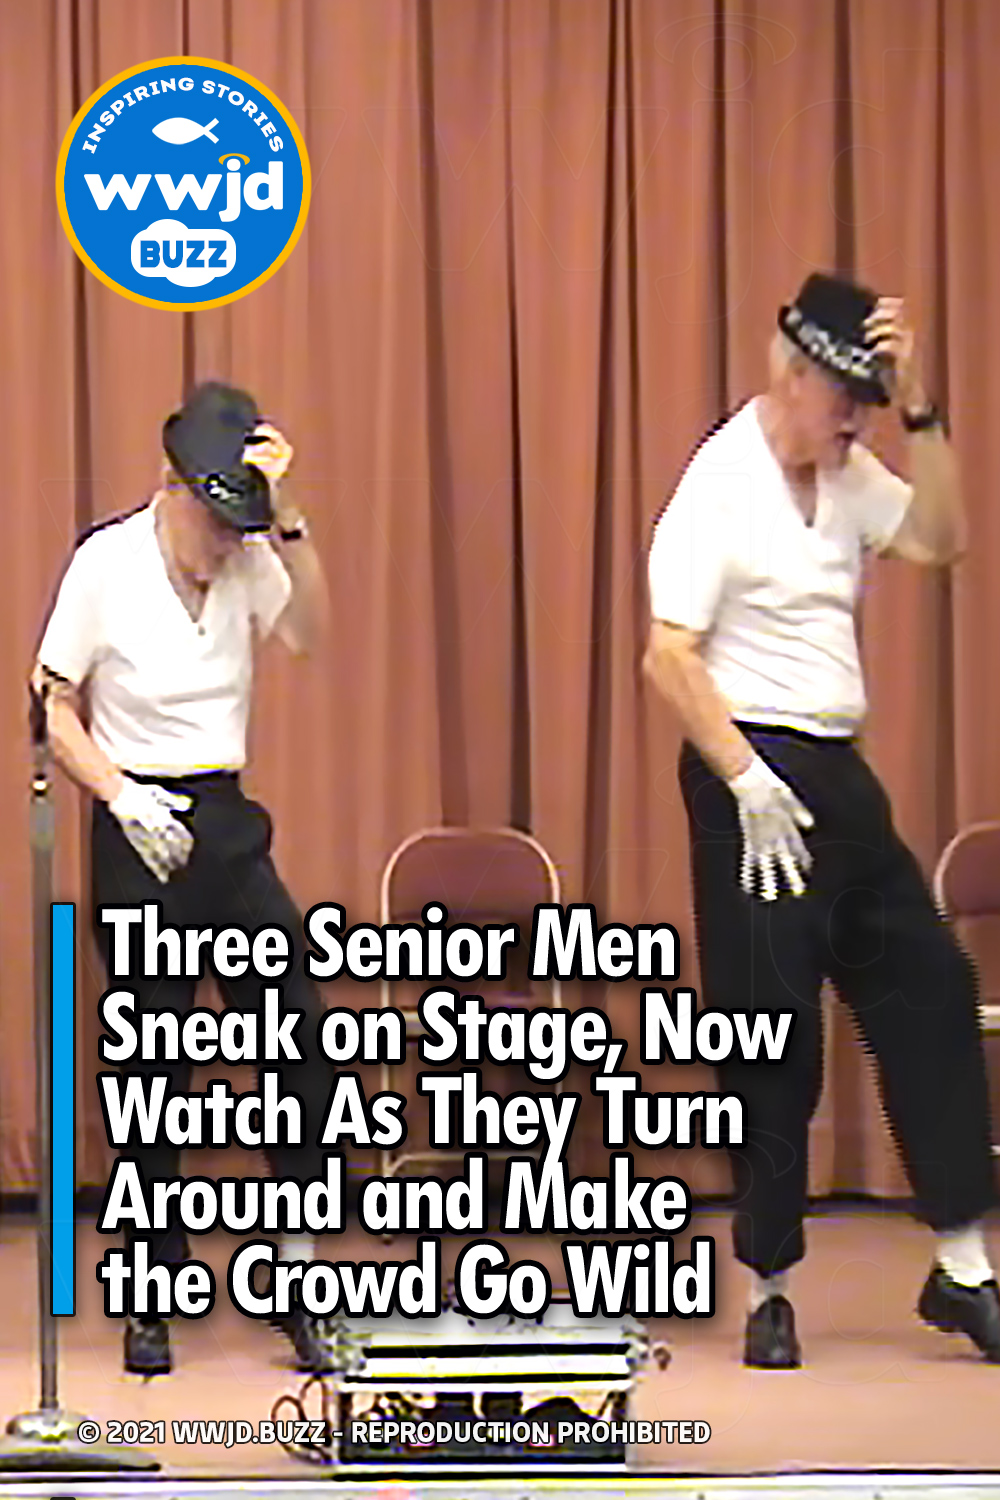 Three Senior Men Sneak on Stage, Now Watch As They Turn Around and Make the Crowd Go Wild